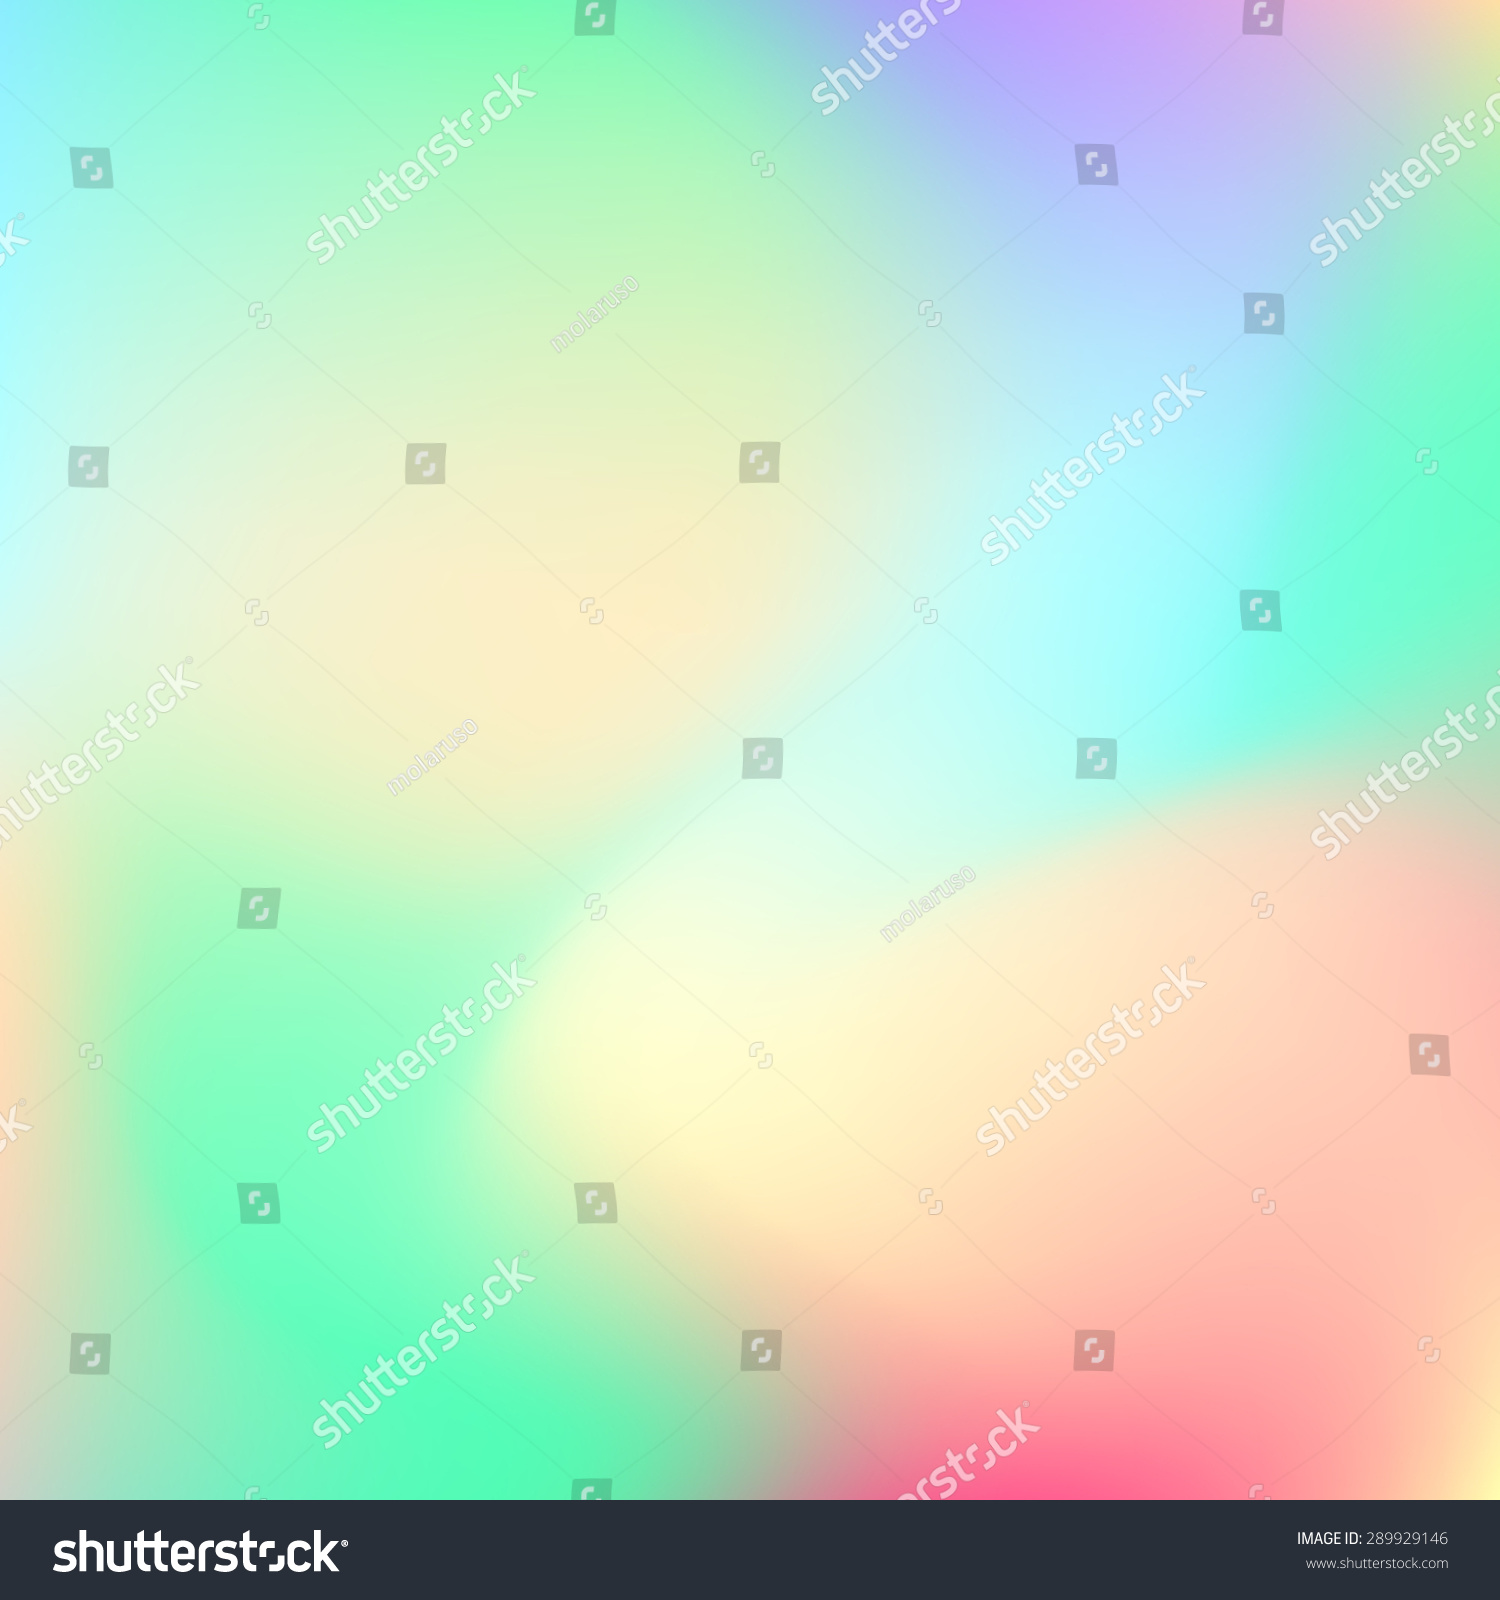 Abstract Trend Gradient Pastel Color Blur Background For Design ...